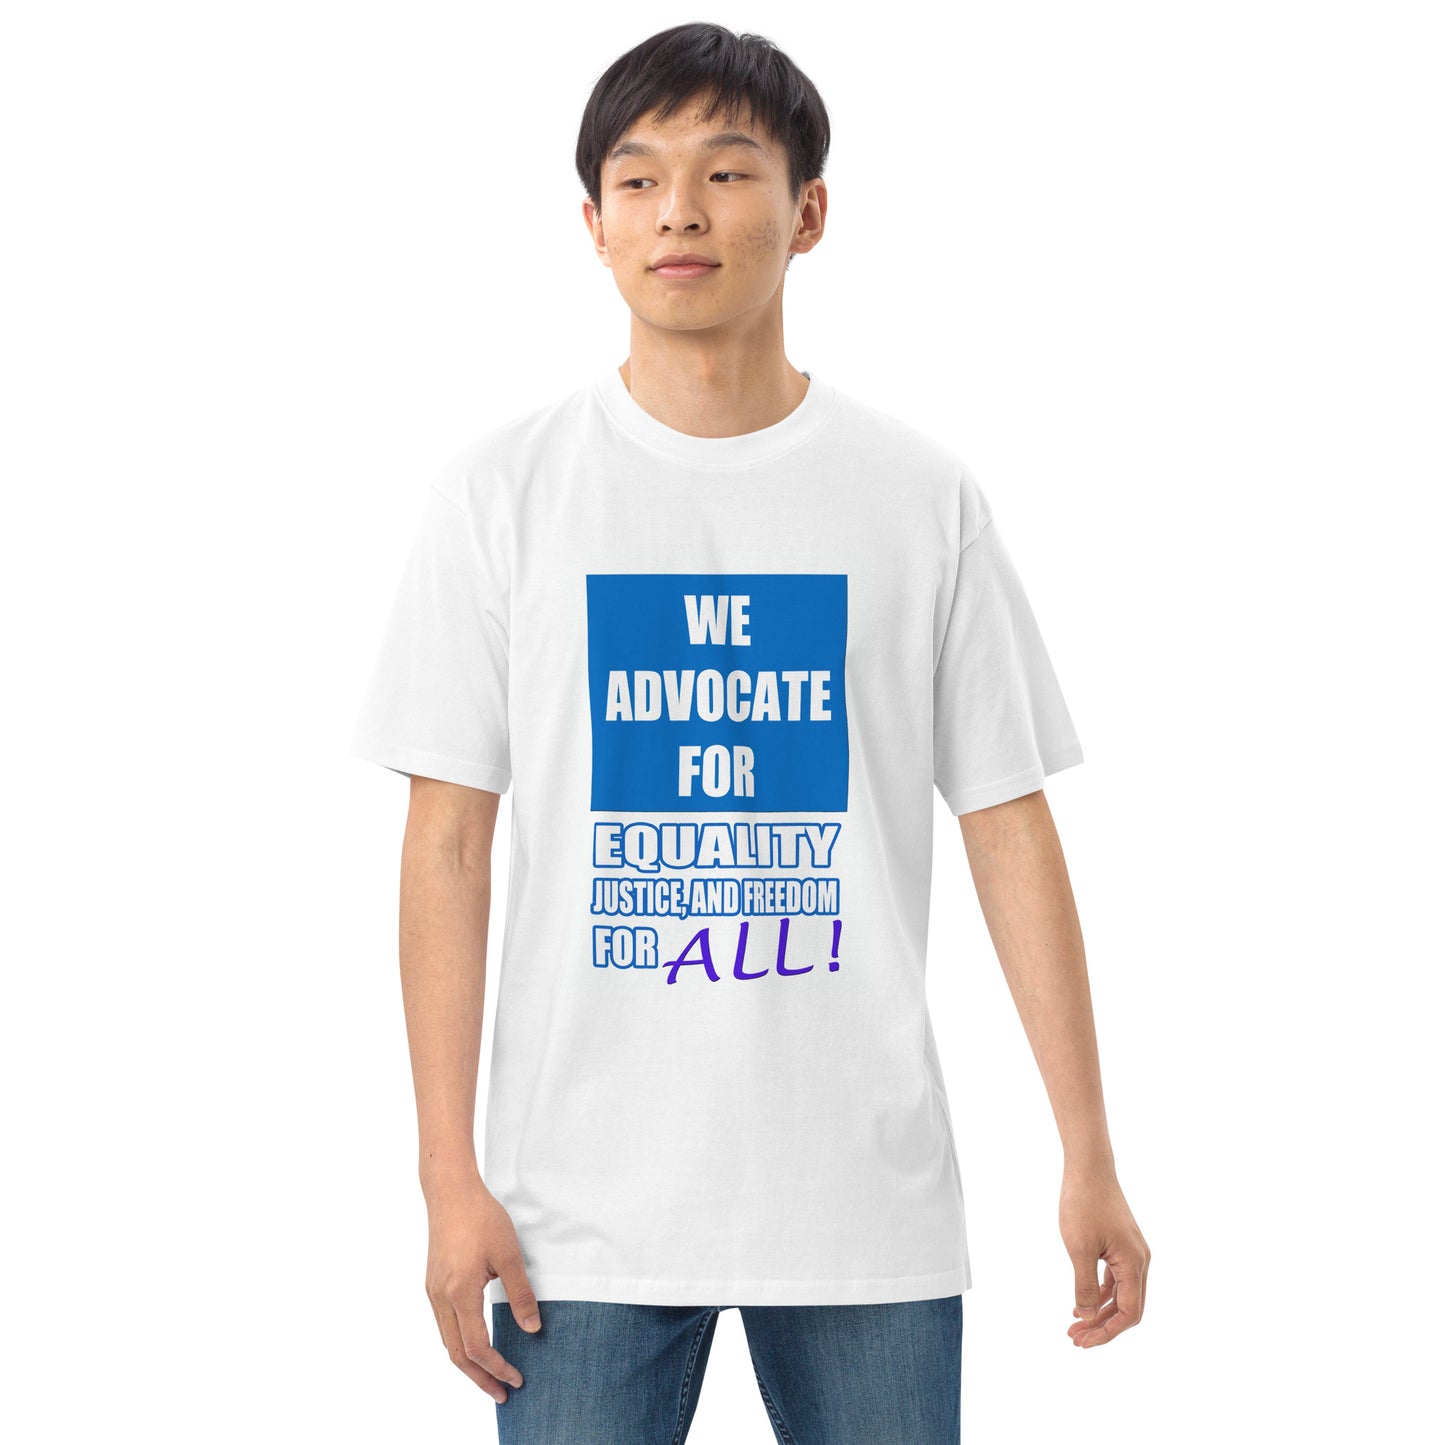 We Advocate "For All" Men’s premium heavyweight tee